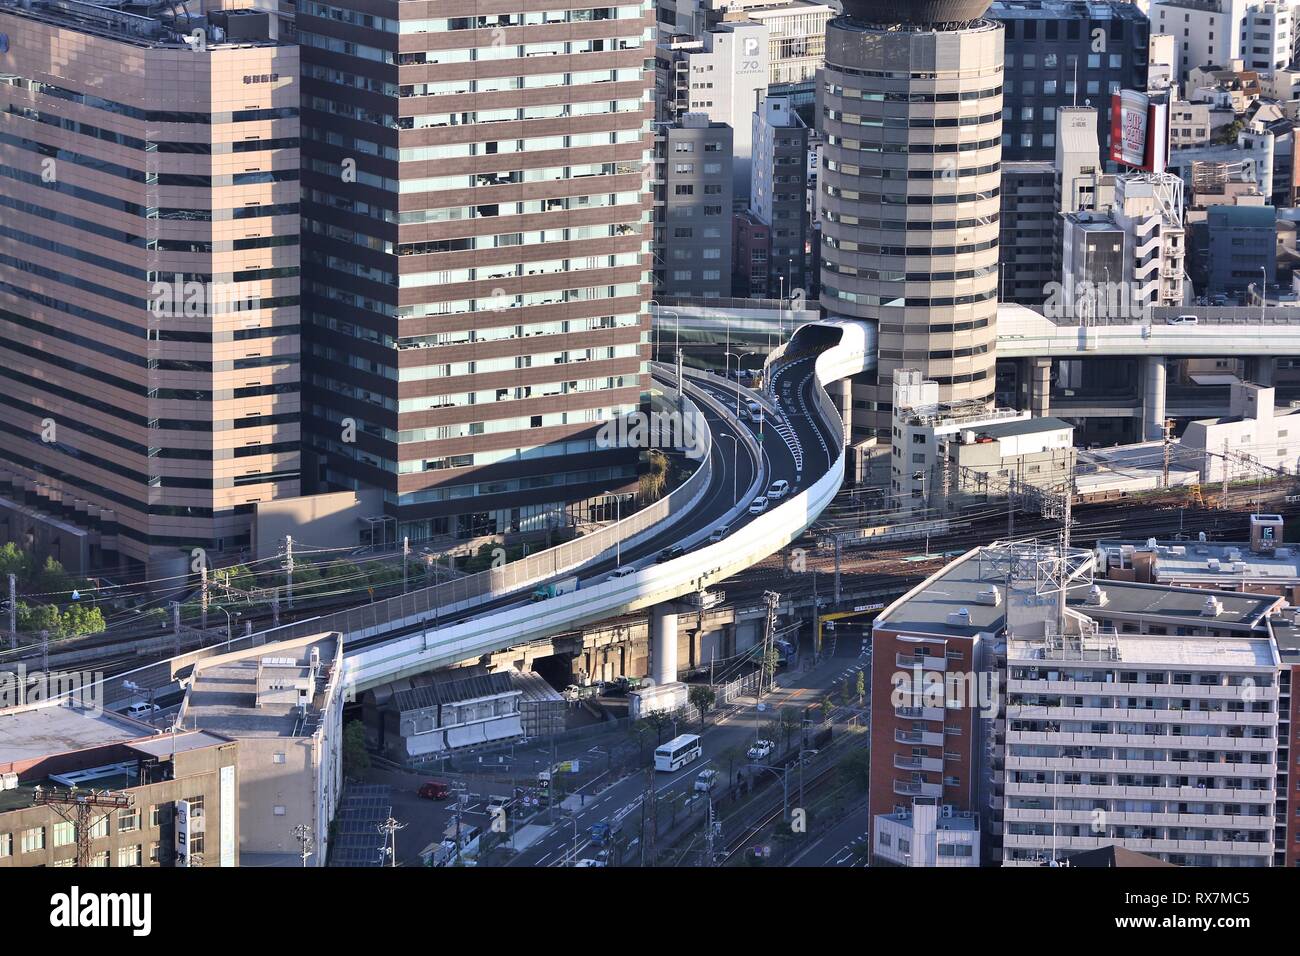 OSAKA, JAPAN - APRIL 27: Cars ride through Gate Tower Building on April 27, 2012 in Osaka, Japan. The building is extremely popular because of highway Stock Photo